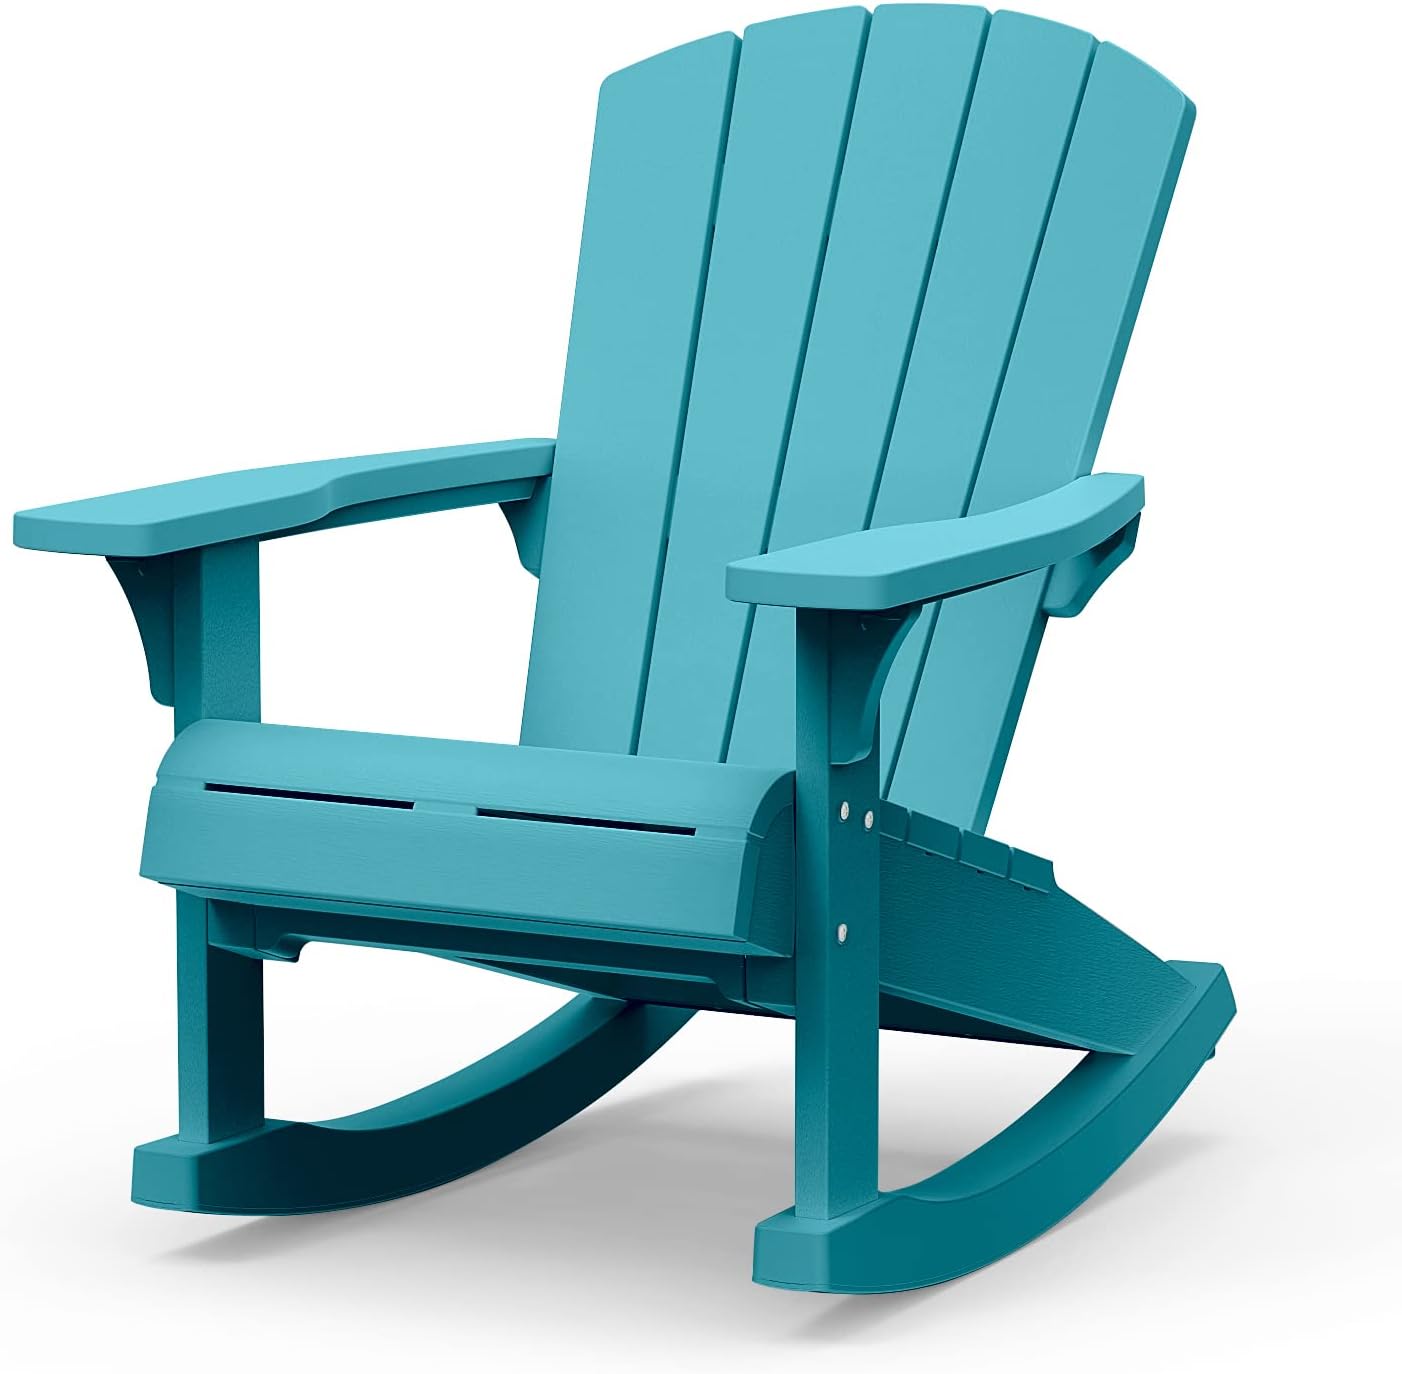 Keter Adirondack Rocker Resin Outdoor Furniture Patio Chair -Perfect for Porch, Pool, and Fire Pit Seating, Teal